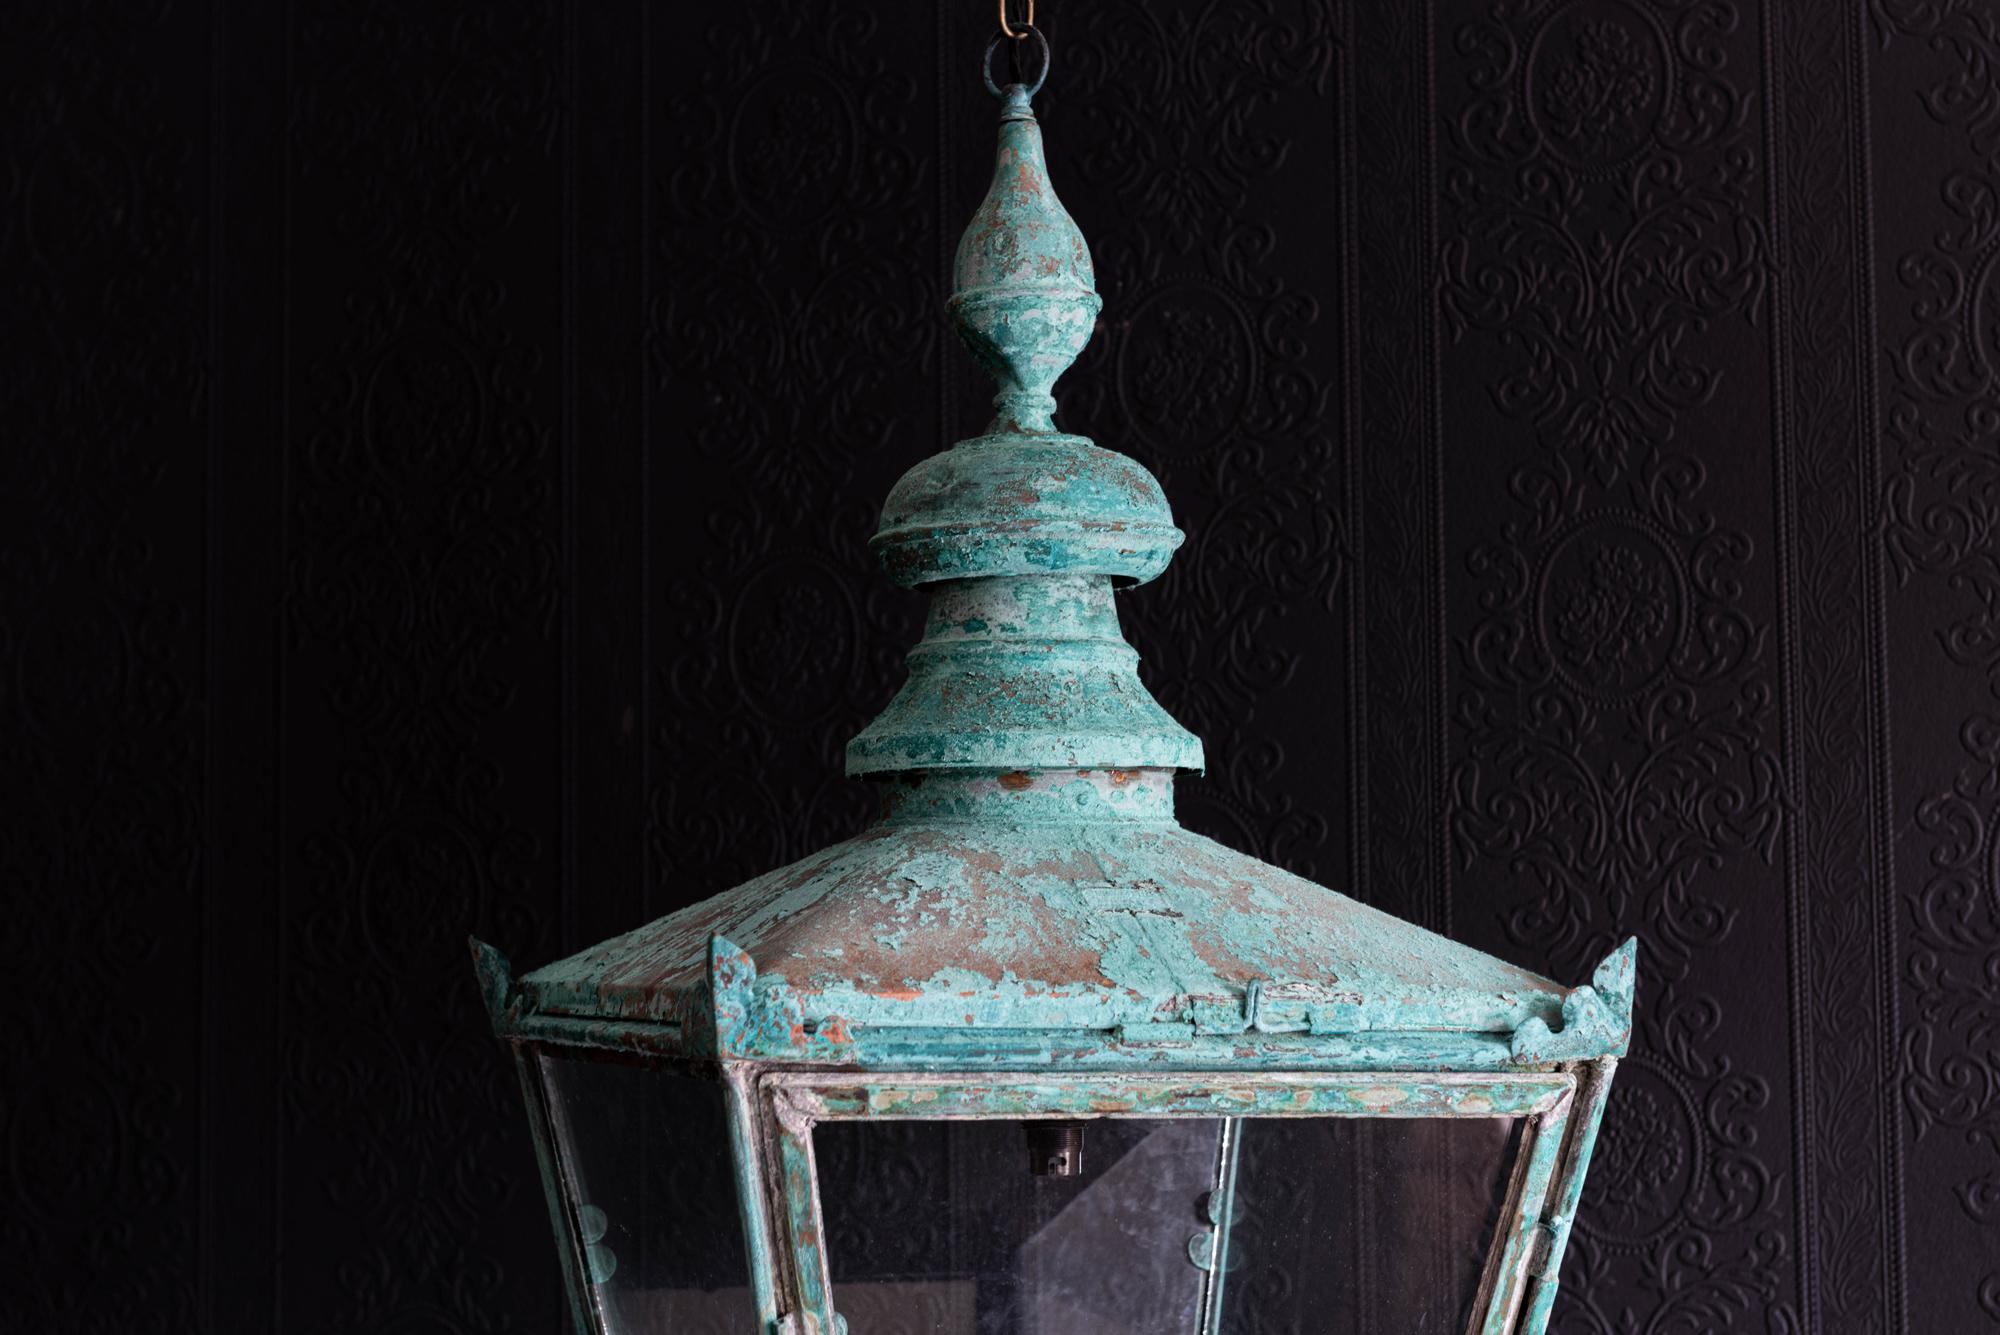 Large Foster & Pullen verdigris copper lantern,
circa 1870.

With hinged canopy & door, Foster & Pullen Bradford name plate in place.

Comes with 1m of silk flex, 1m of heavy gauge antique brass chain and bronze ceiling hook.

Re-glazed